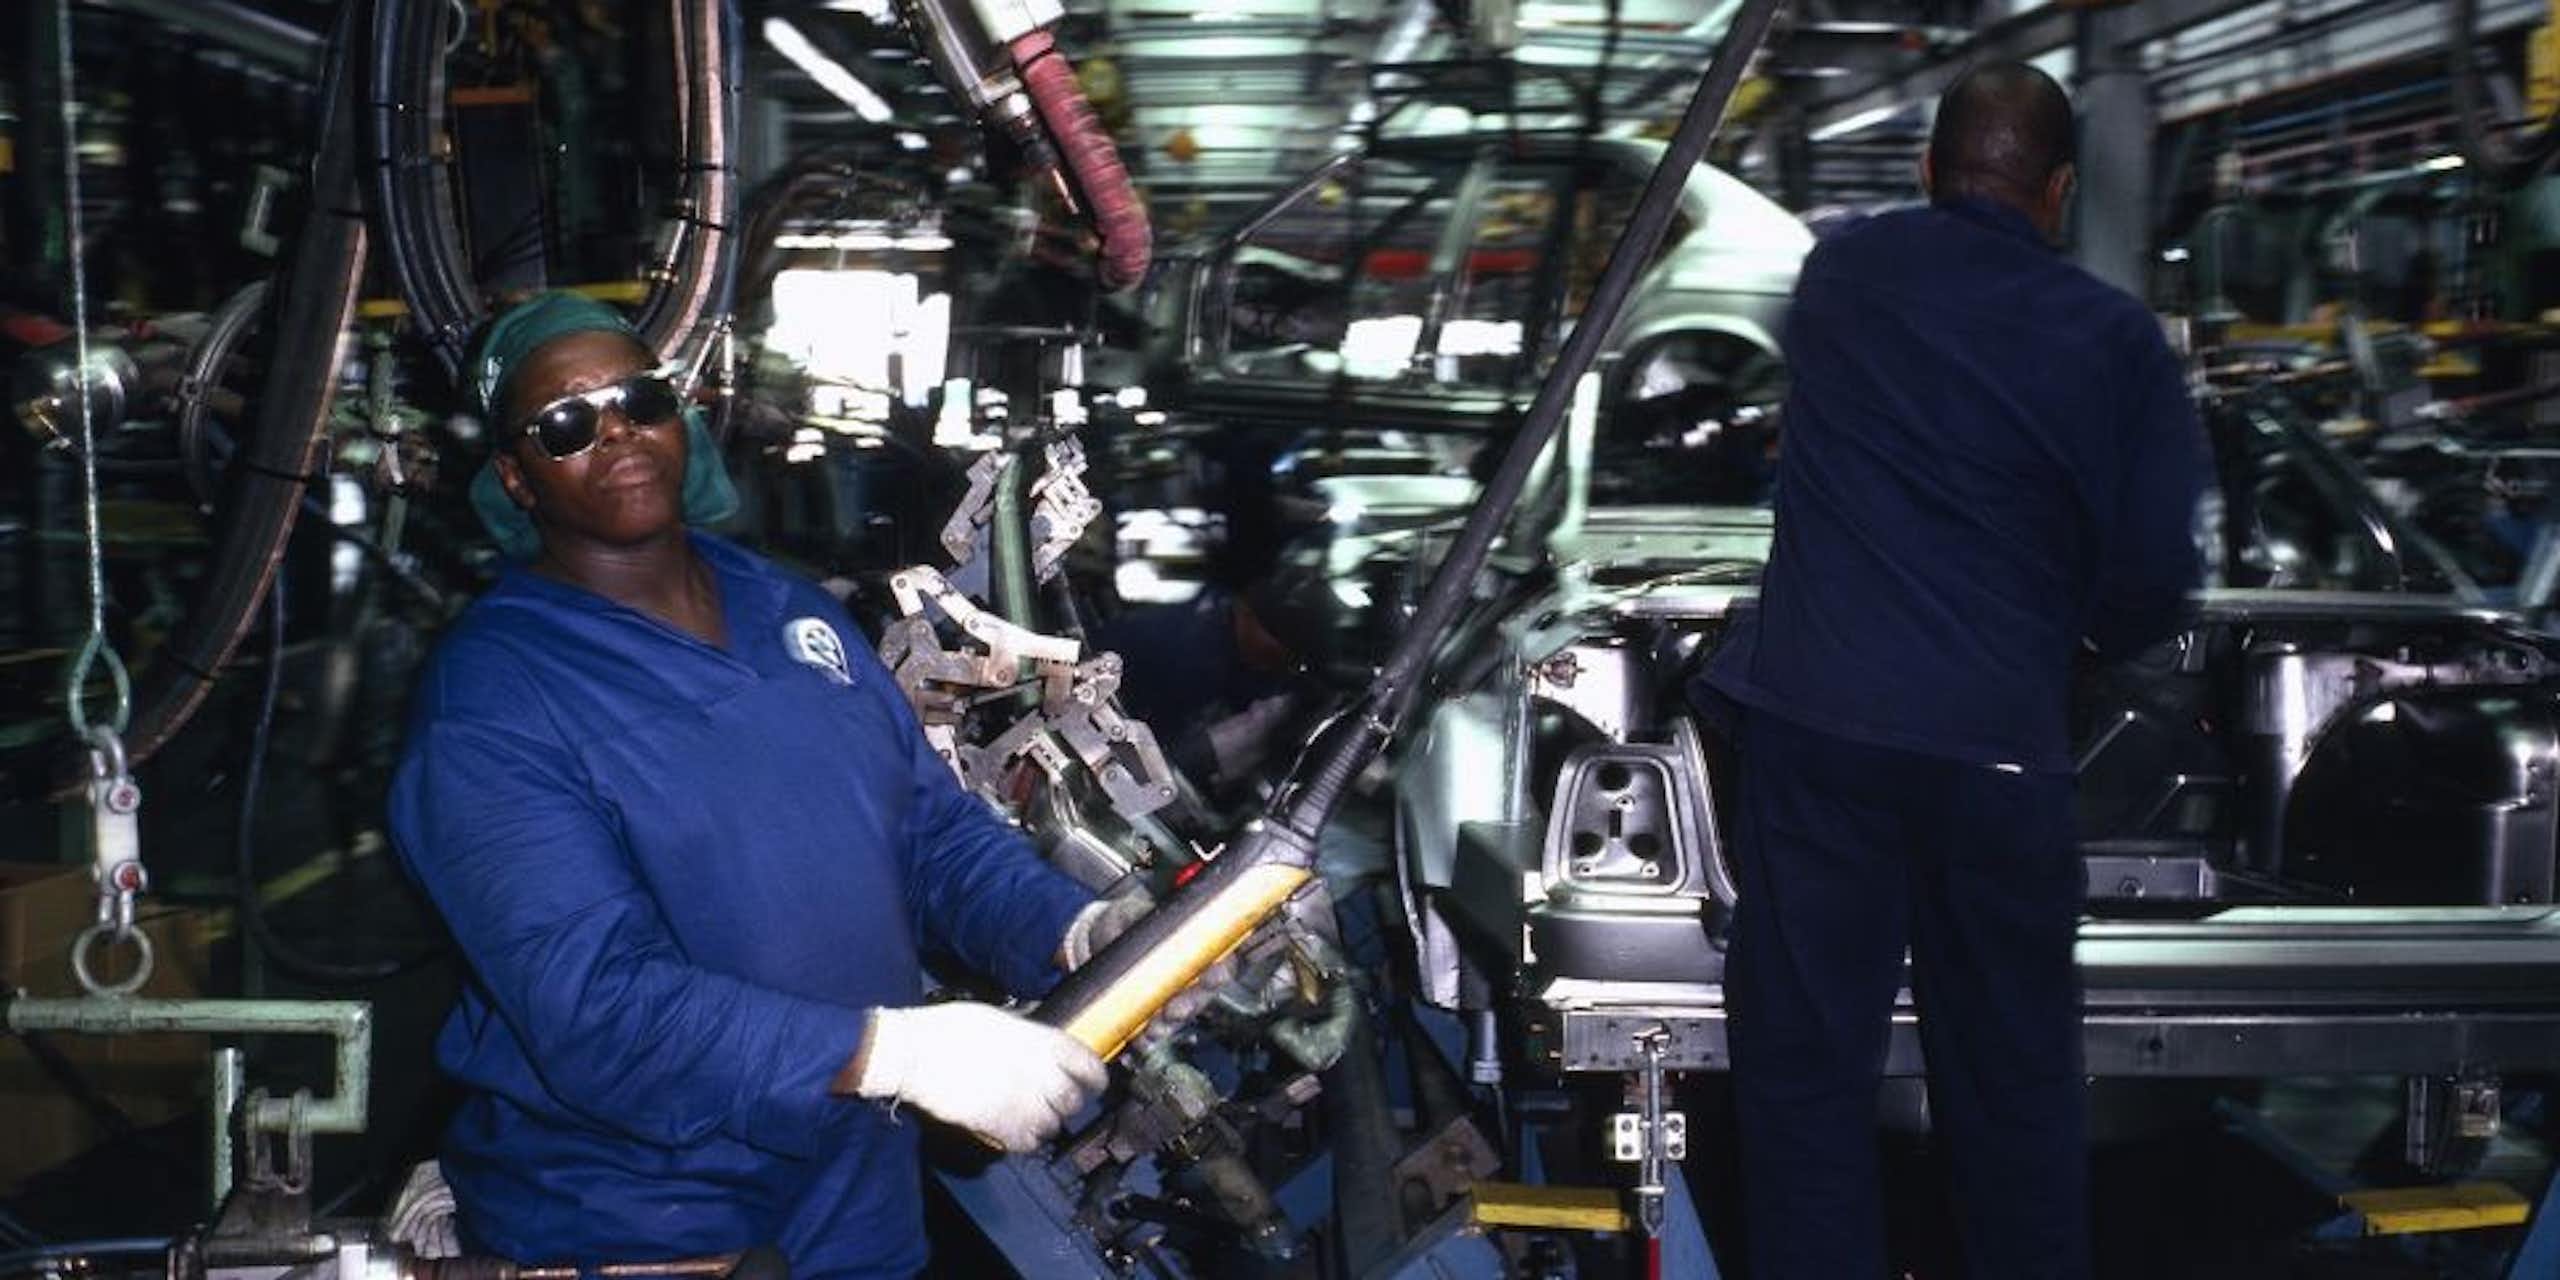 Men in blue overalls and protective glasses and gloves, amid machinery and the semi-built body of a vehicle